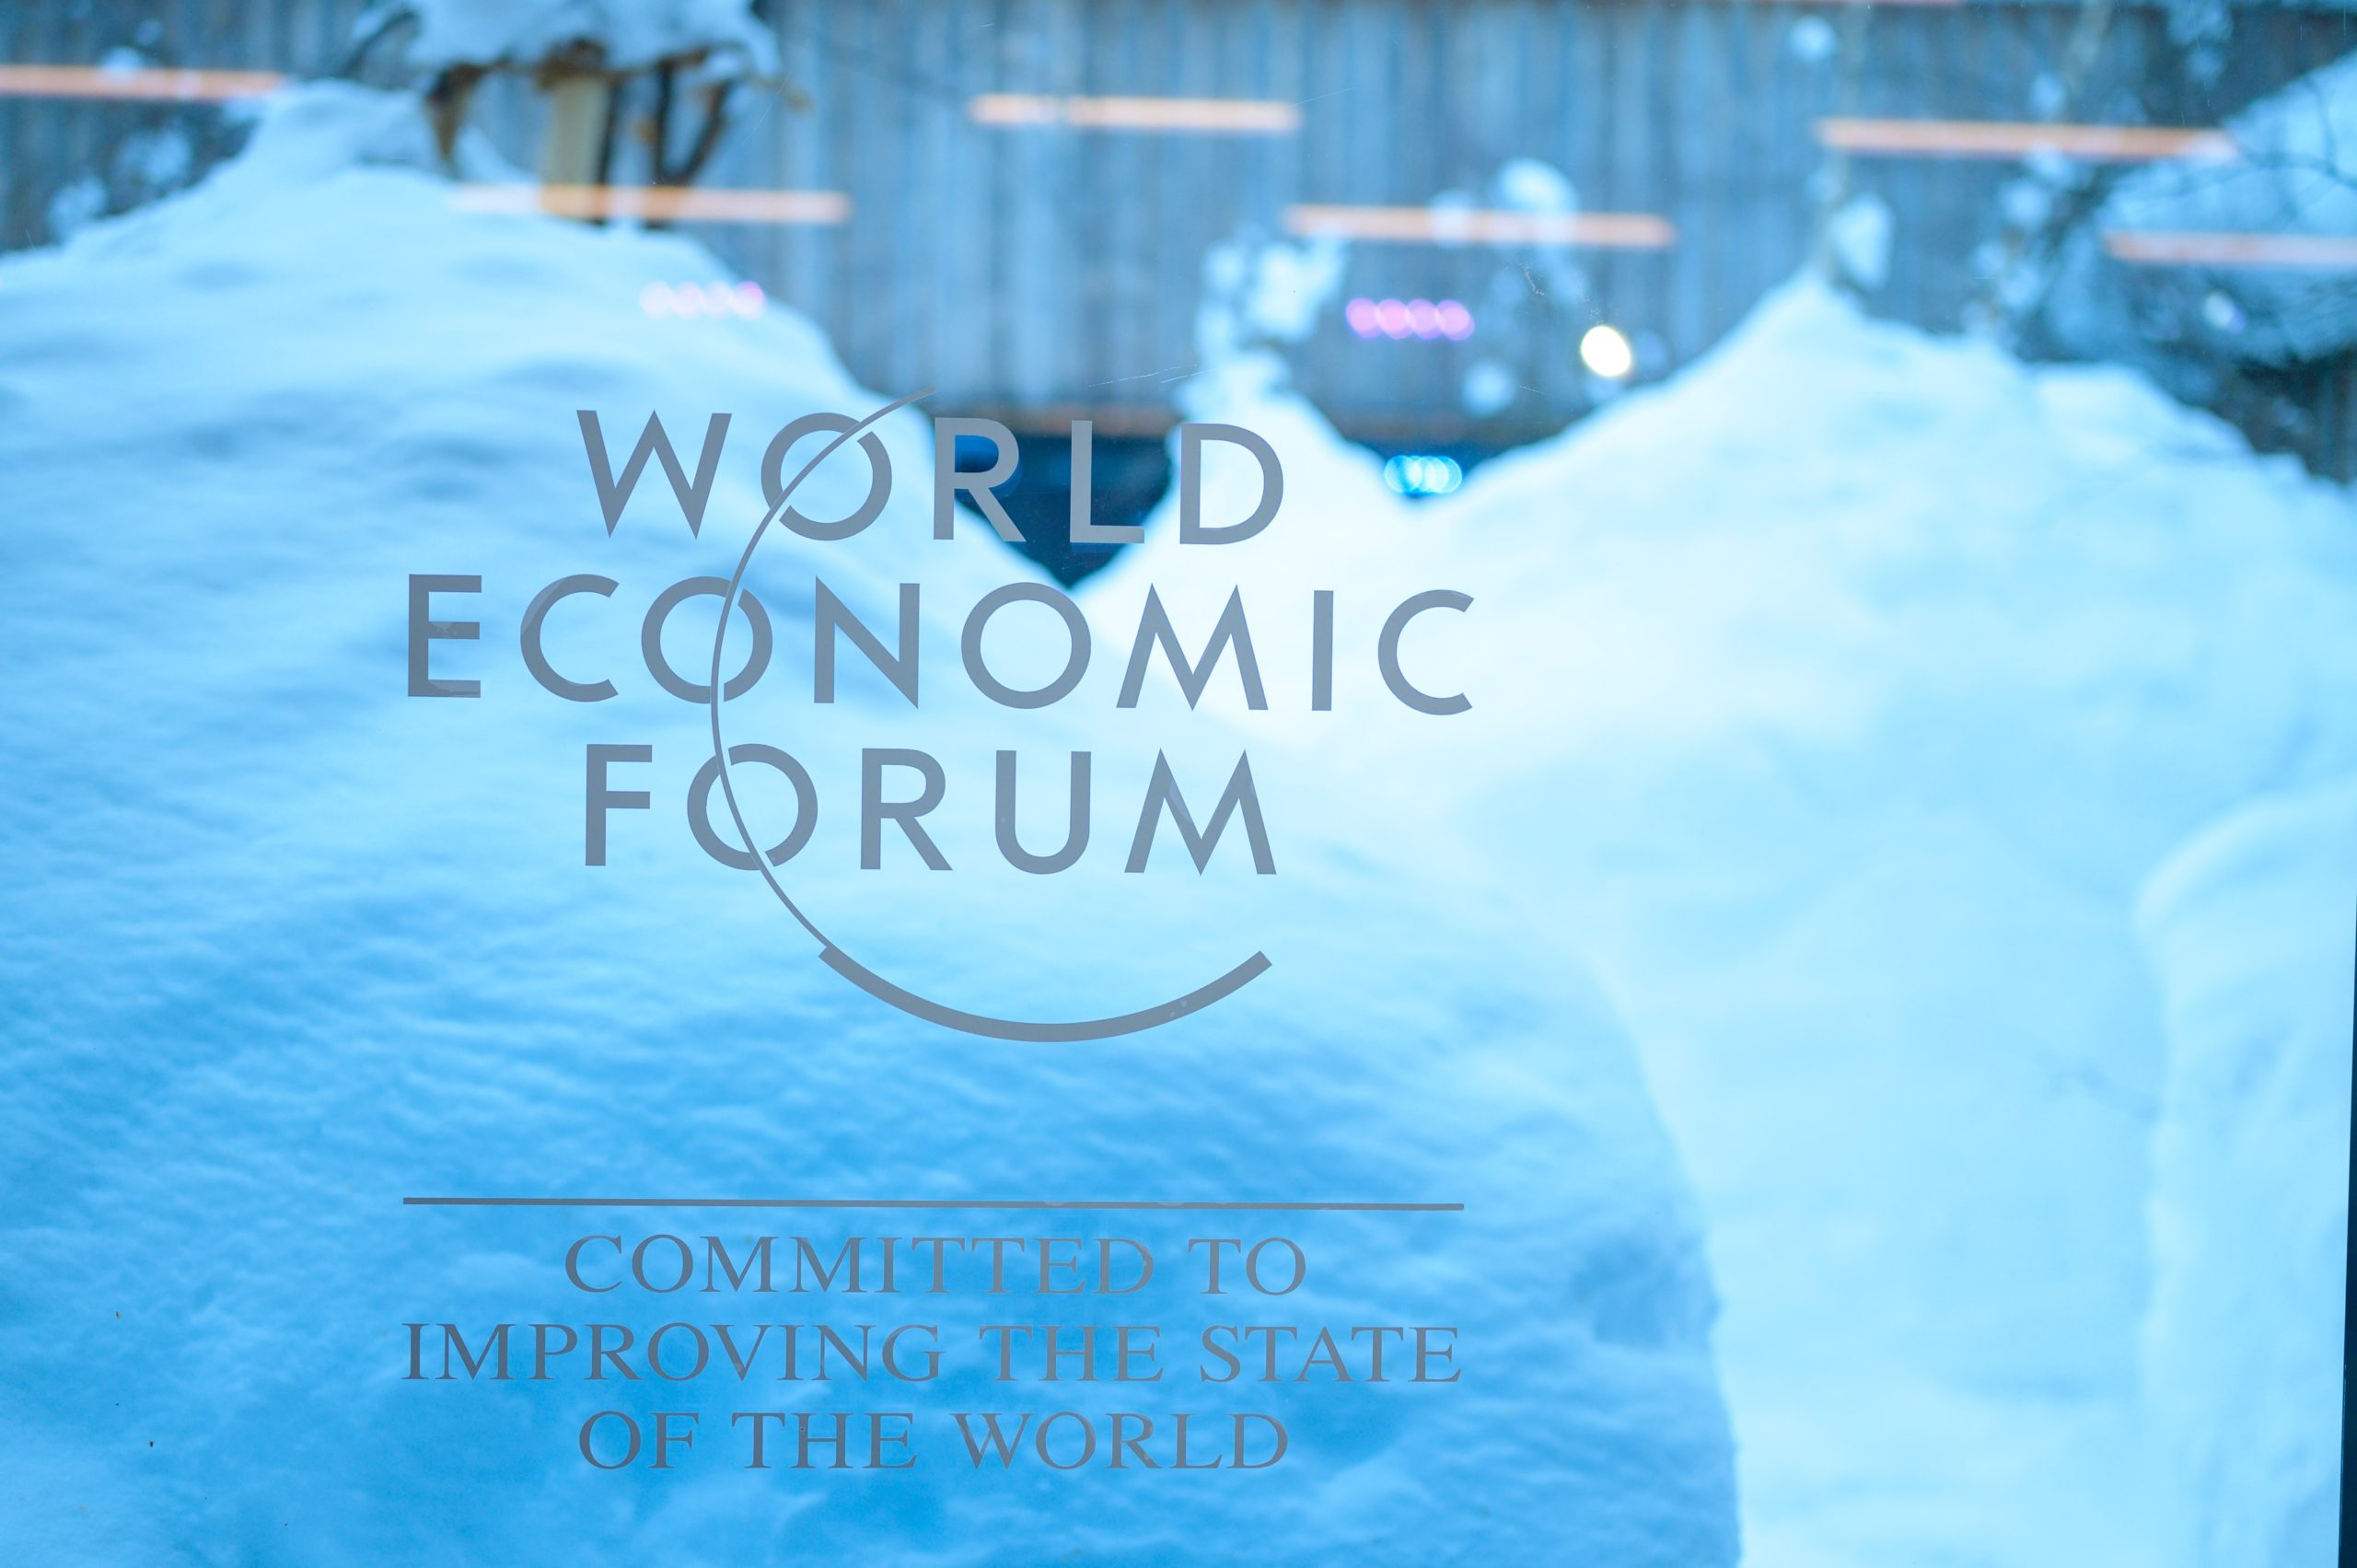 Davos takes centre stage as Global leaders from around the world descend on Switzerland for the annual World Economic Forum.